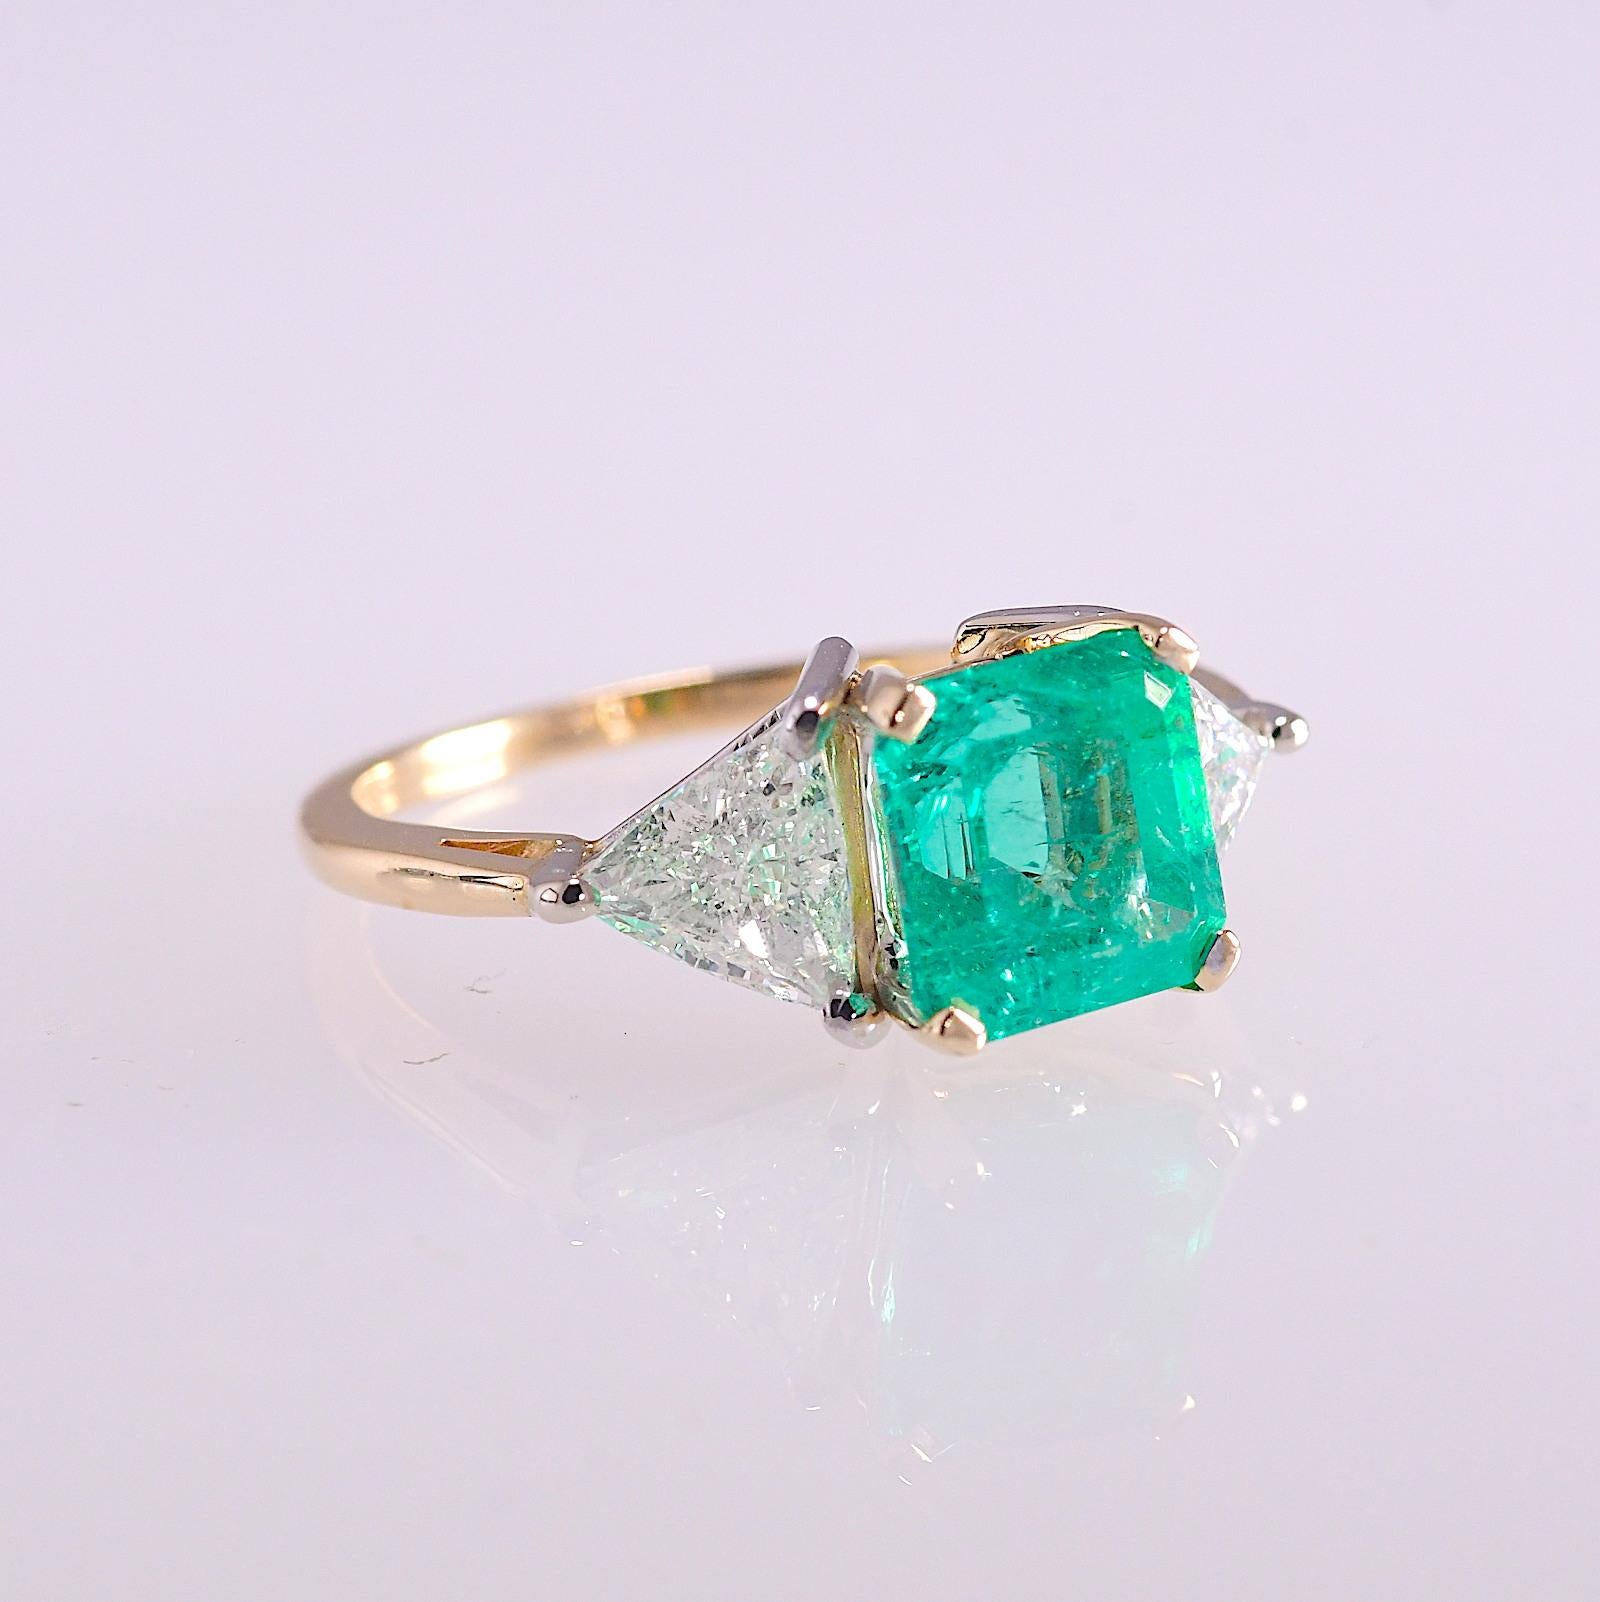 This classic style ring contains a 2.82 carat square emerald cut emerald with two triangular brilliant diamonds totaling 1.40 carat.
The emerald is bright and vibrant with a bluish green hue. The diamonds are SI1-SI2 clarity and G-H color. The ring